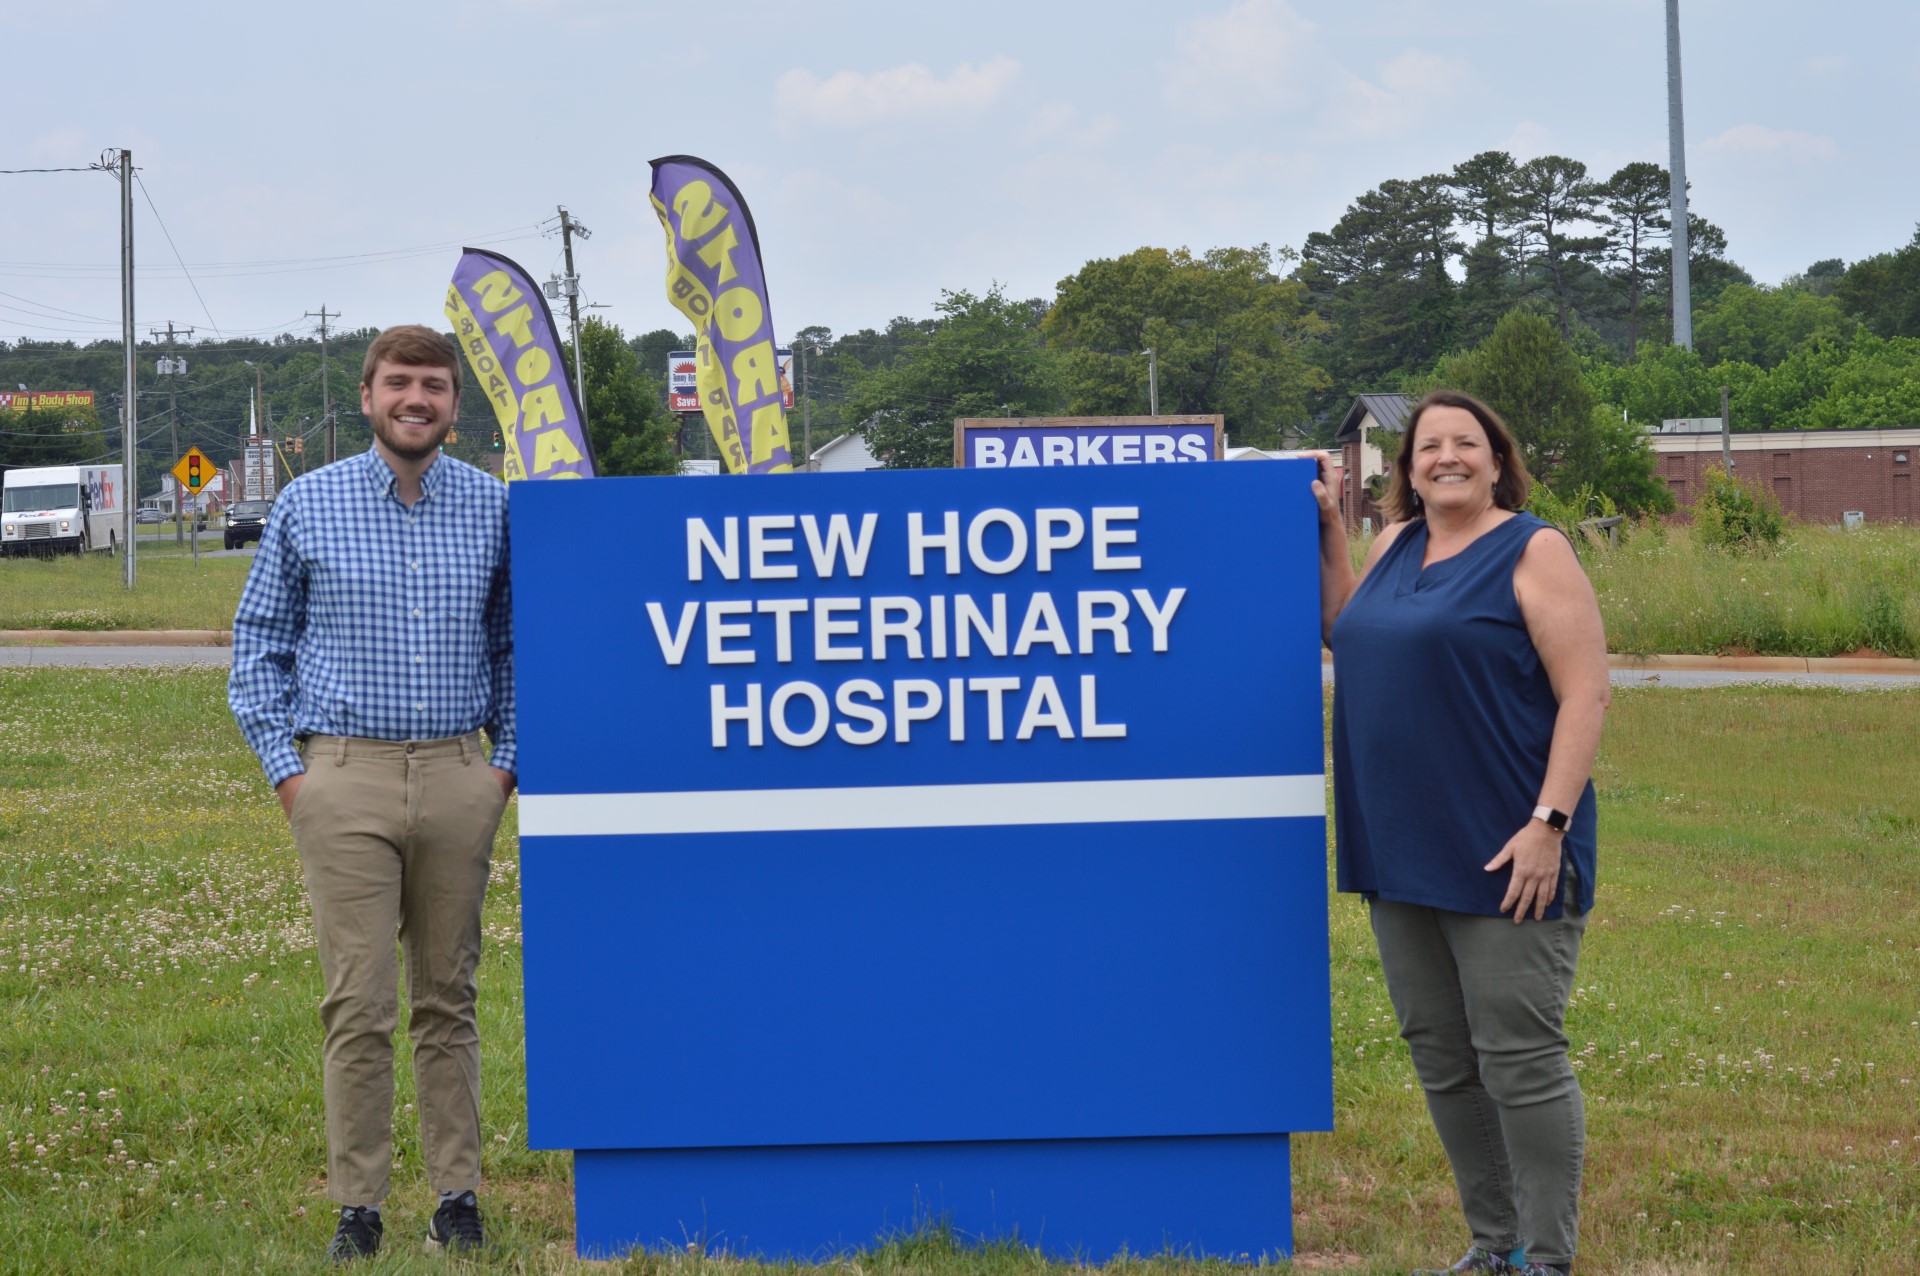 Welcome to New Hope Veterinary Hospital